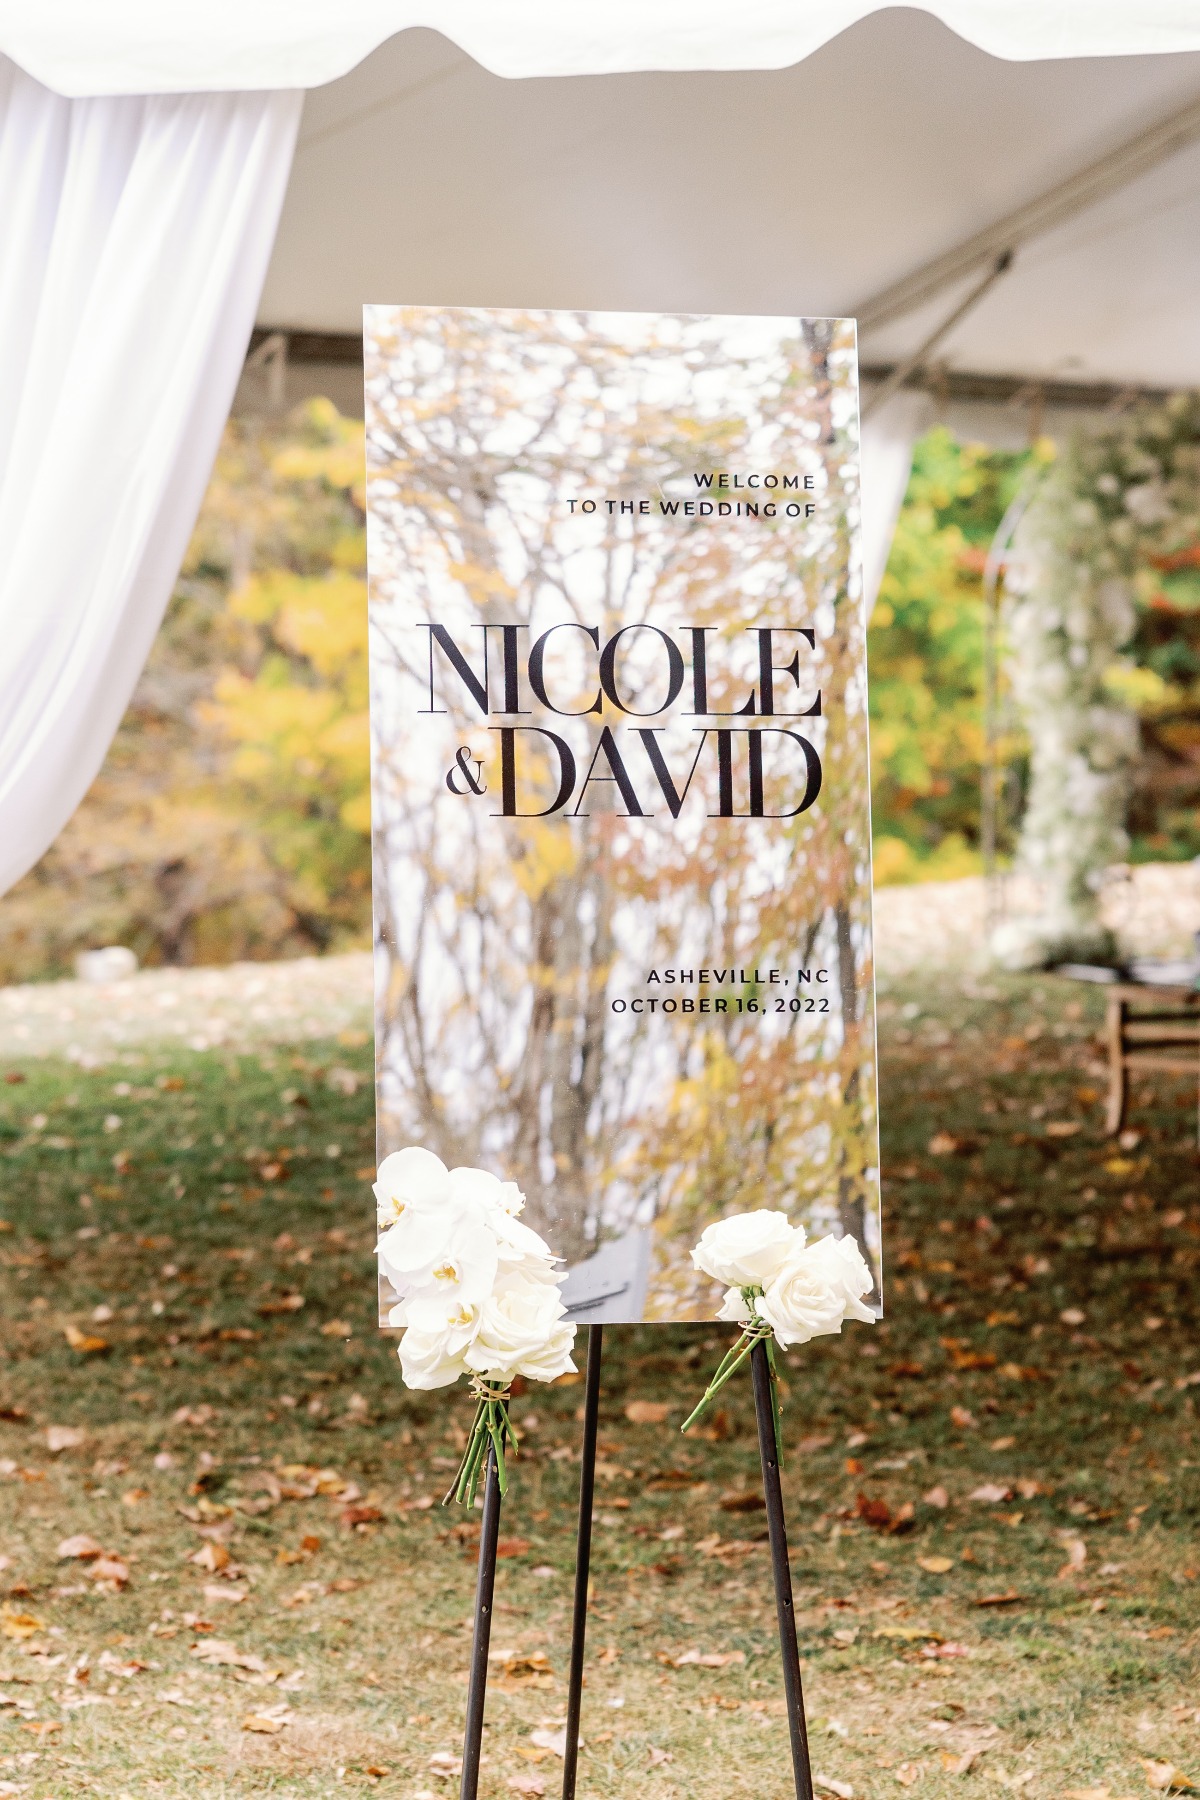 Mirrored modern wedding welcome sign with black text 